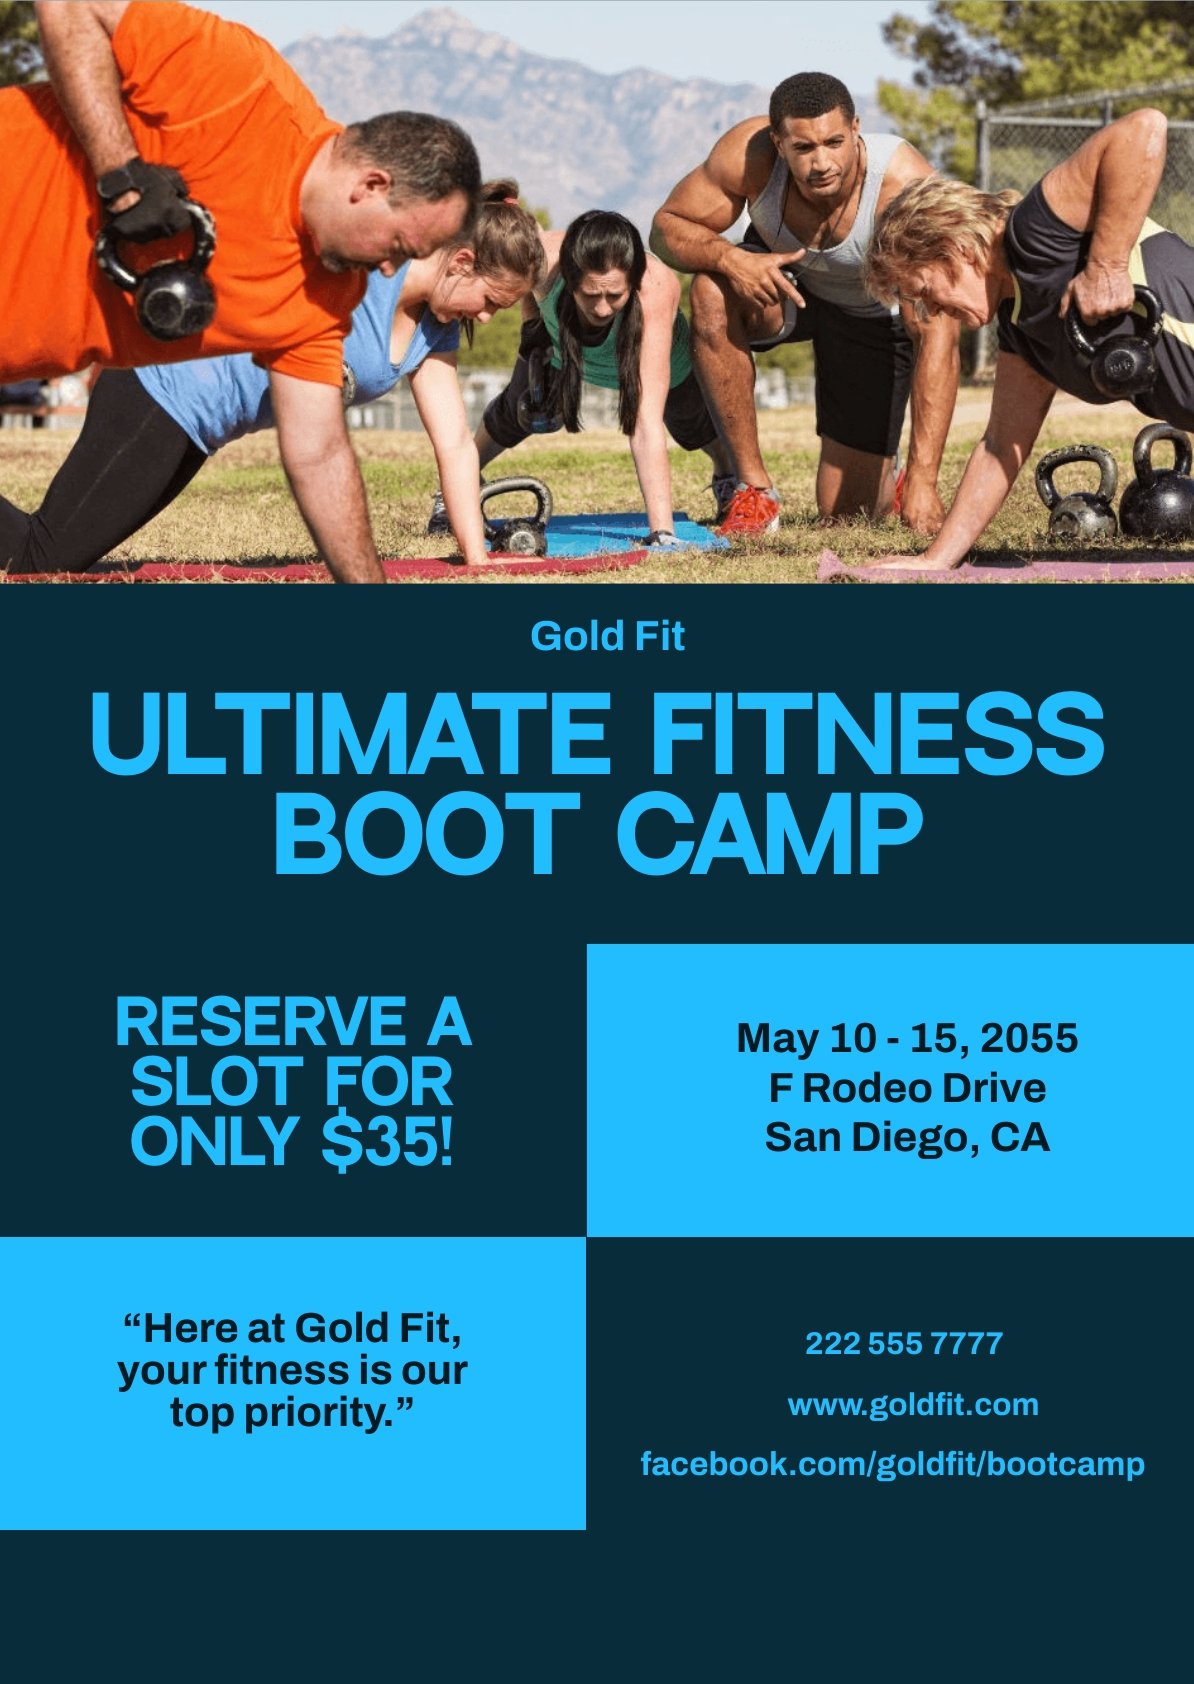 Advertising Boot Camp Flyer